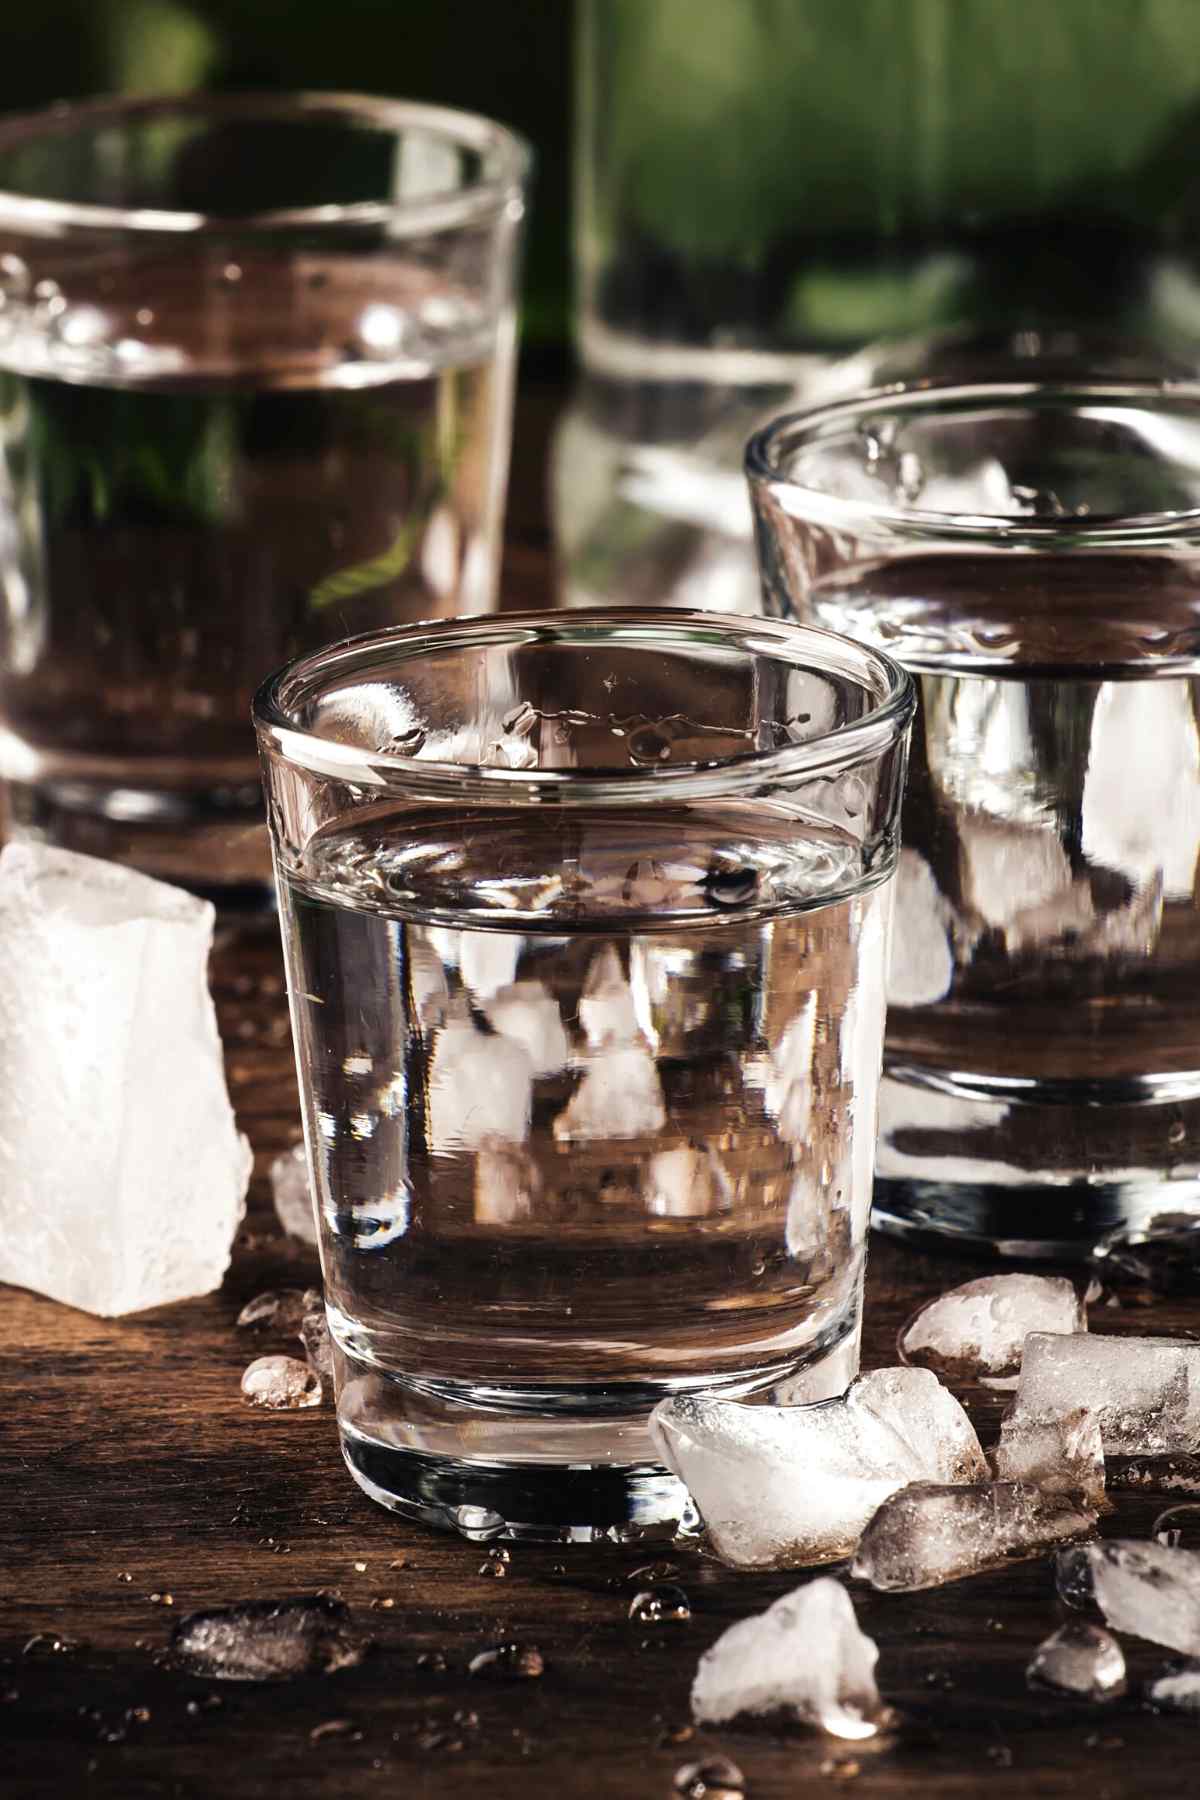 Wondering if you can have vodka on a keto diet? How many carbs are in a shot of vodka? What about keto-friendly vodka cocktails?